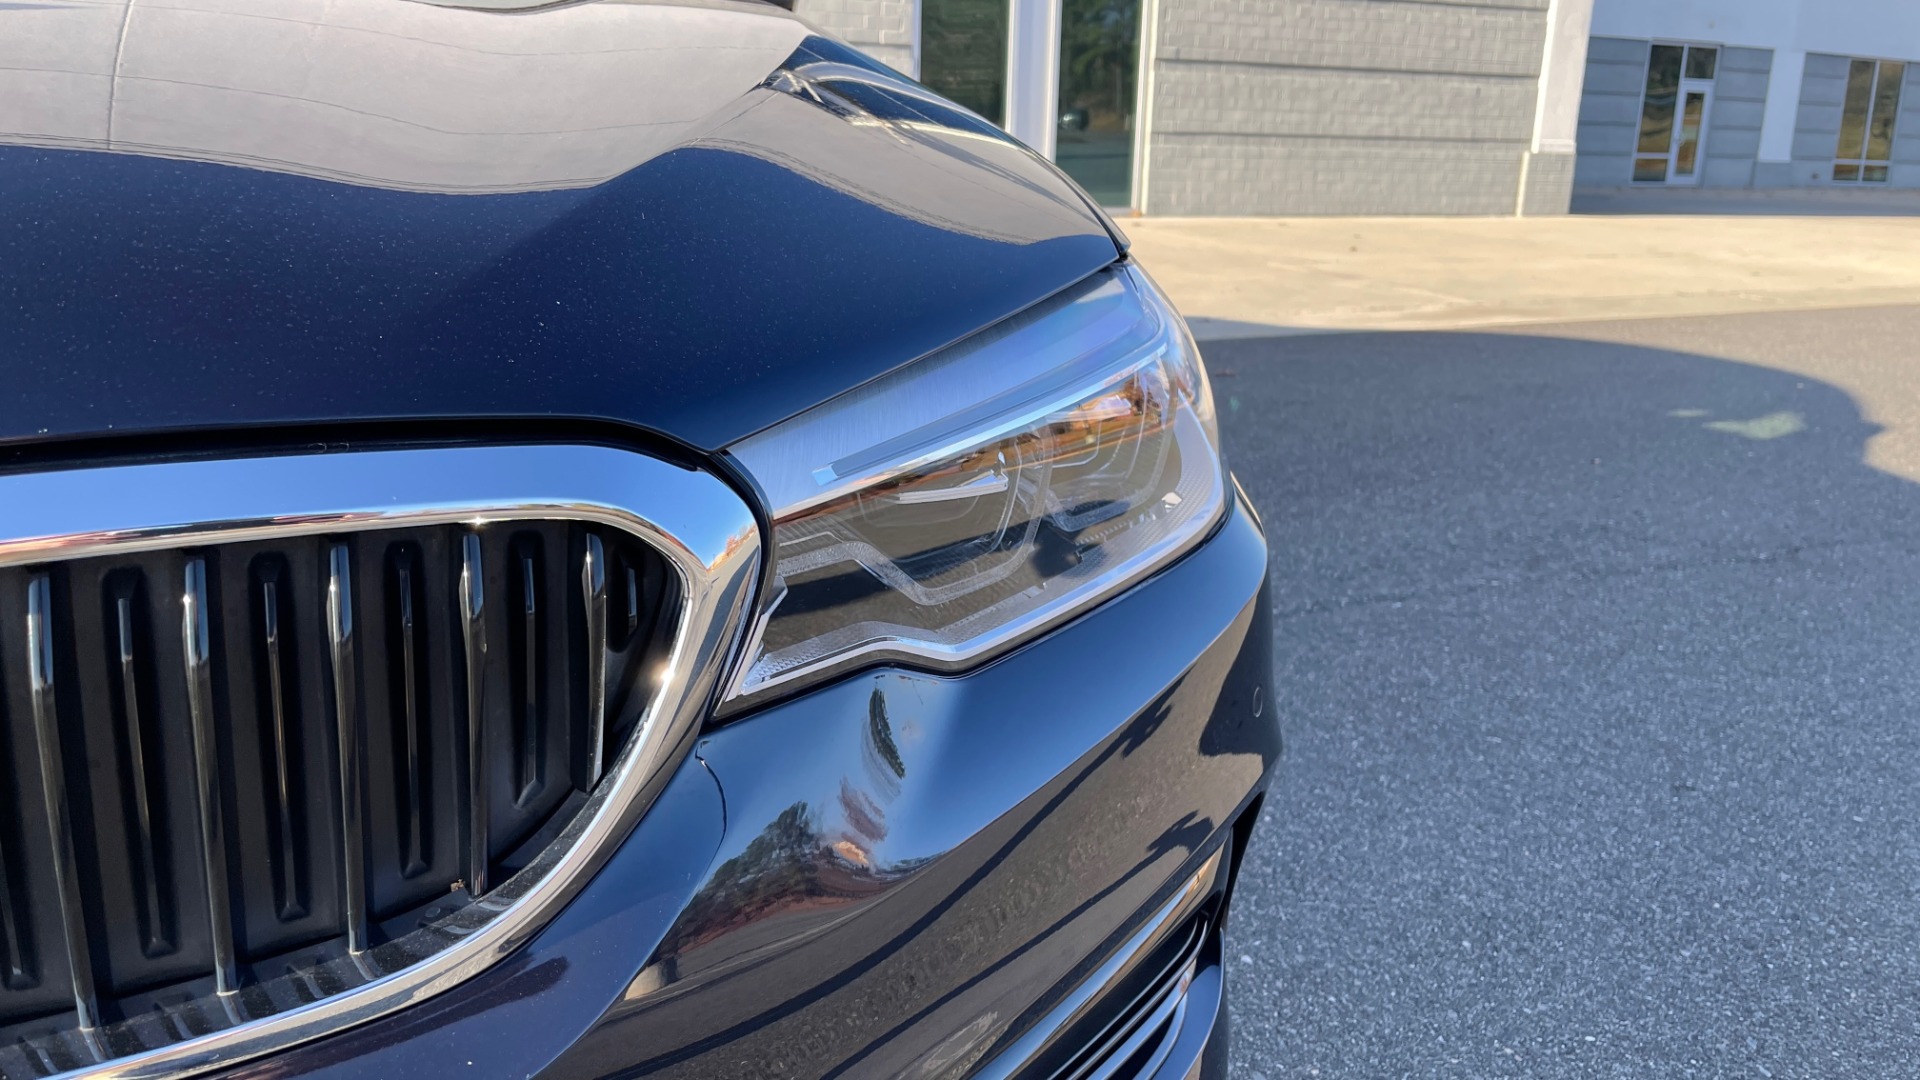 Used 2018 BMW 5 SERIES 530I XDRIVE PREMIUM / EXEC PKG / DRVR ASST PLUS / NAV / REARVIEW for sale Sold at Formula Imports in Charlotte NC 28227 16